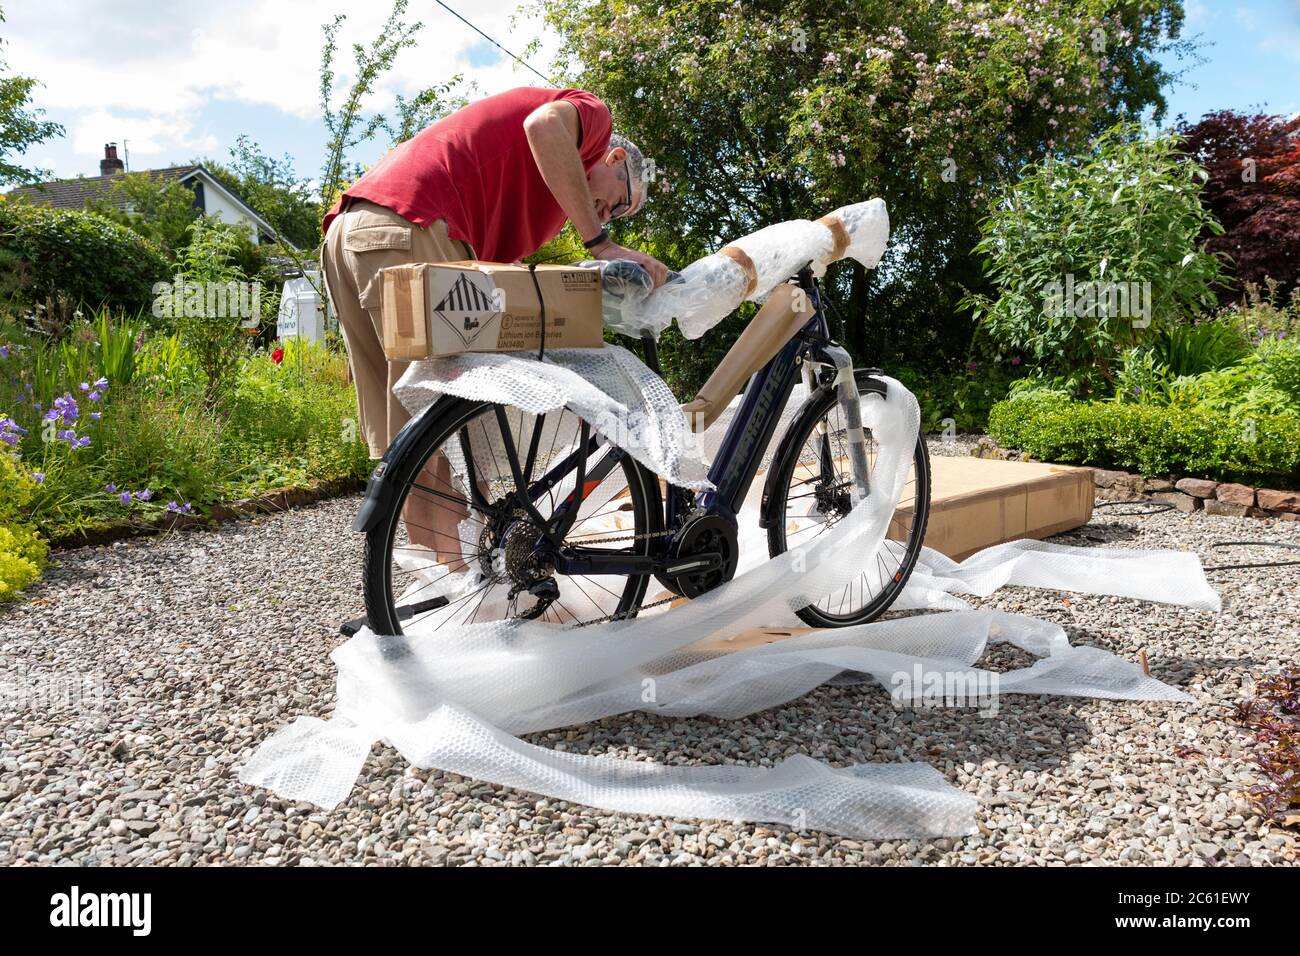 Home delivery of electric bicycle ebike ordered online during the coronavirus lockdown - bike taken out of bike box and unwrapping bubble wrap - UK Stock Photo